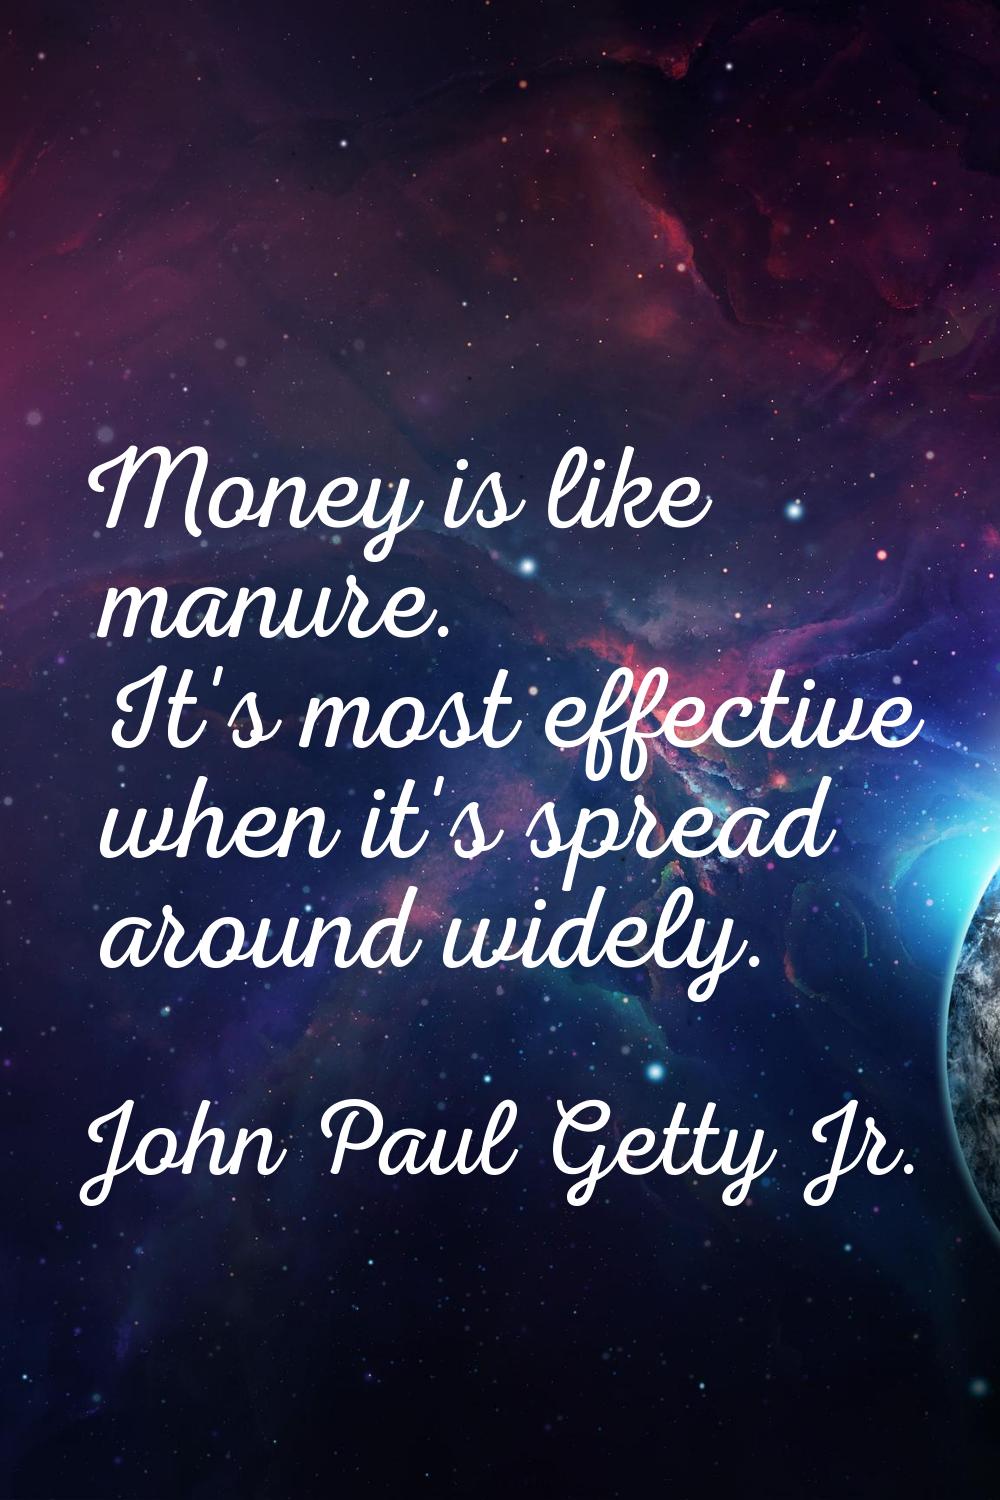 Money is like manure. It's most effective when it's spread around widely.